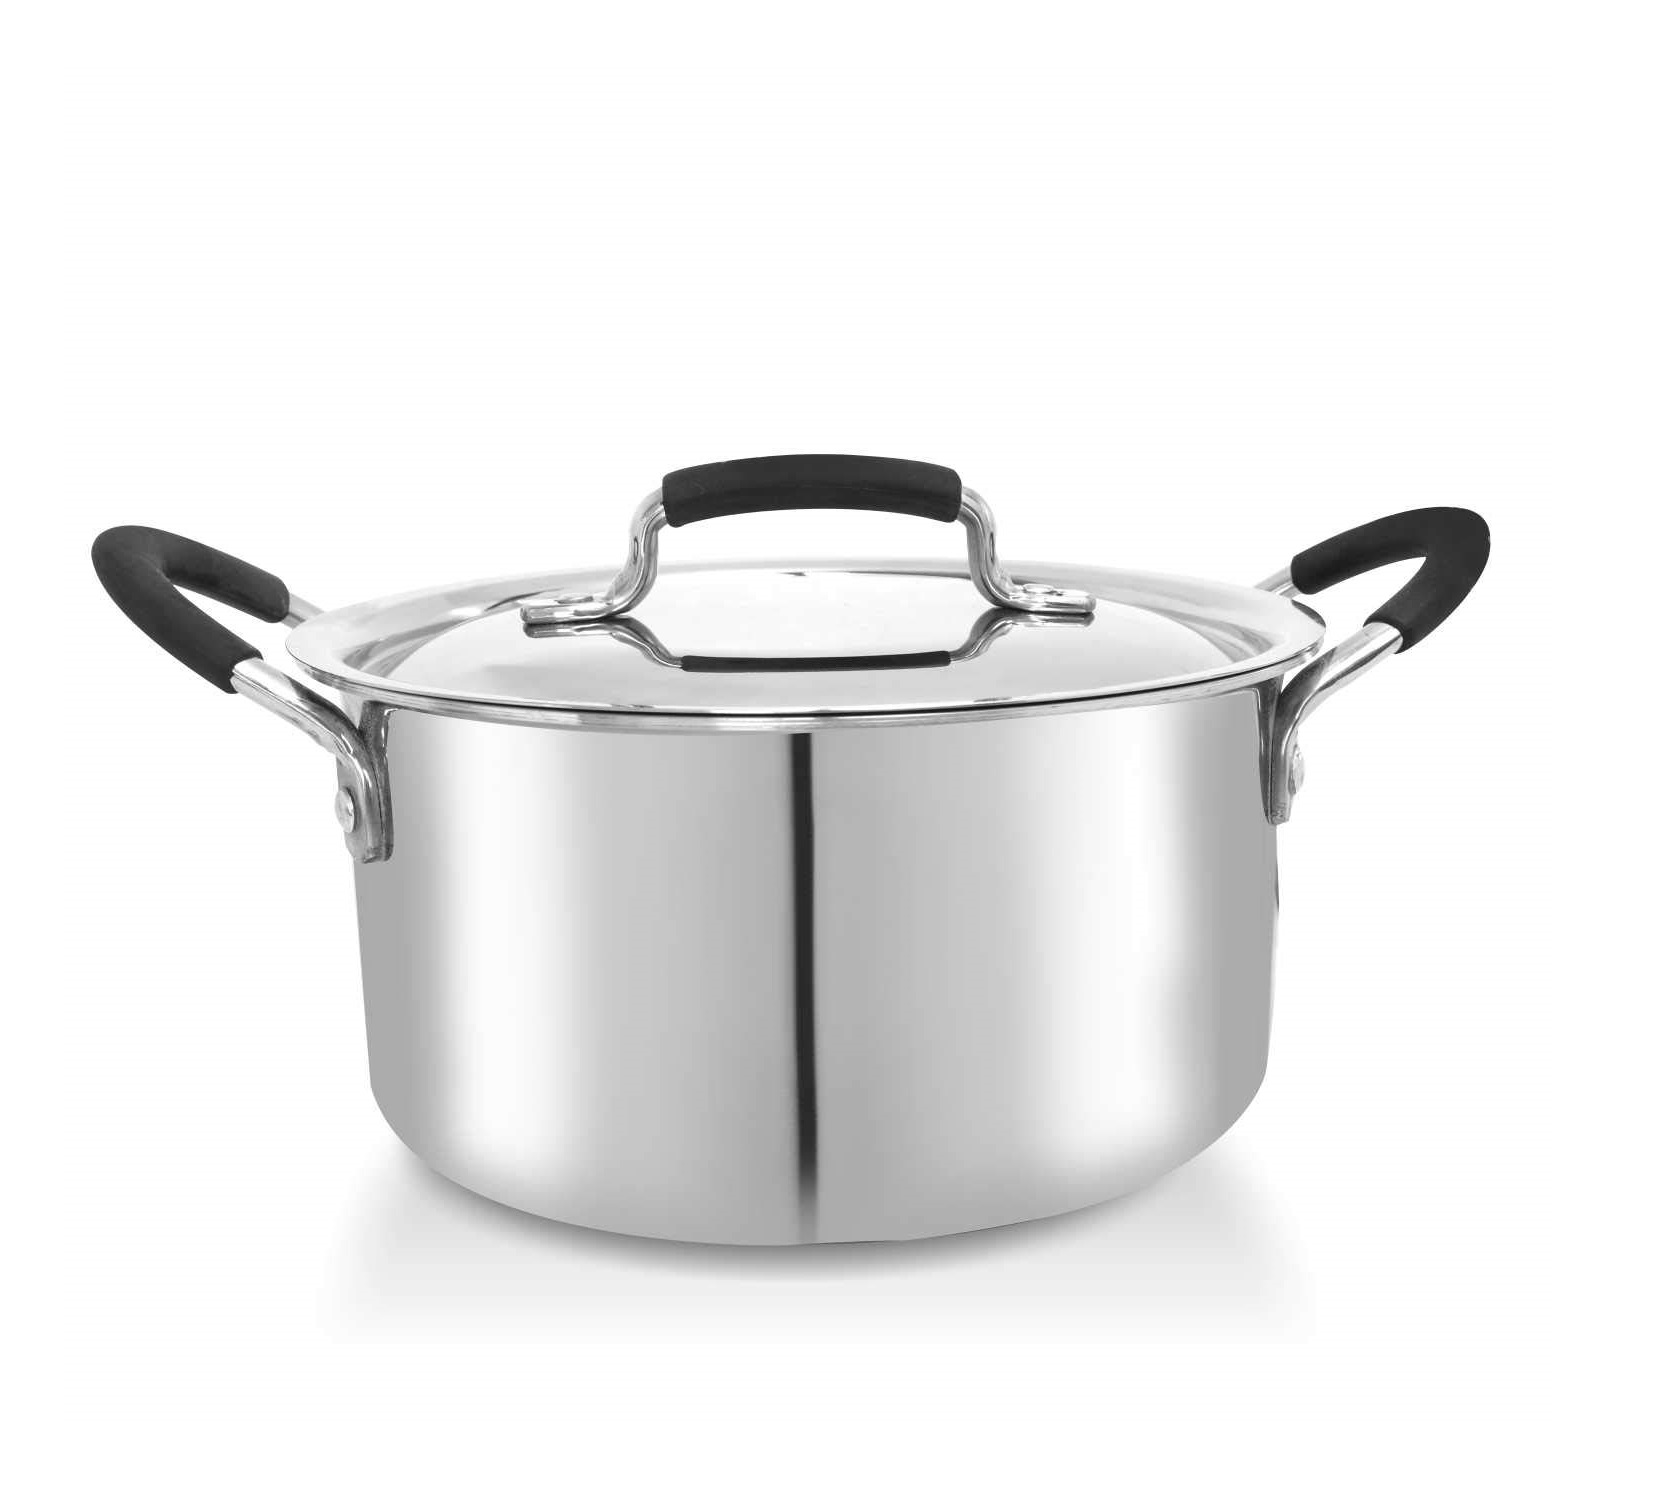 Warmeo Stainless Steel Tri Ply Casserol (Induction, 2 Lt)